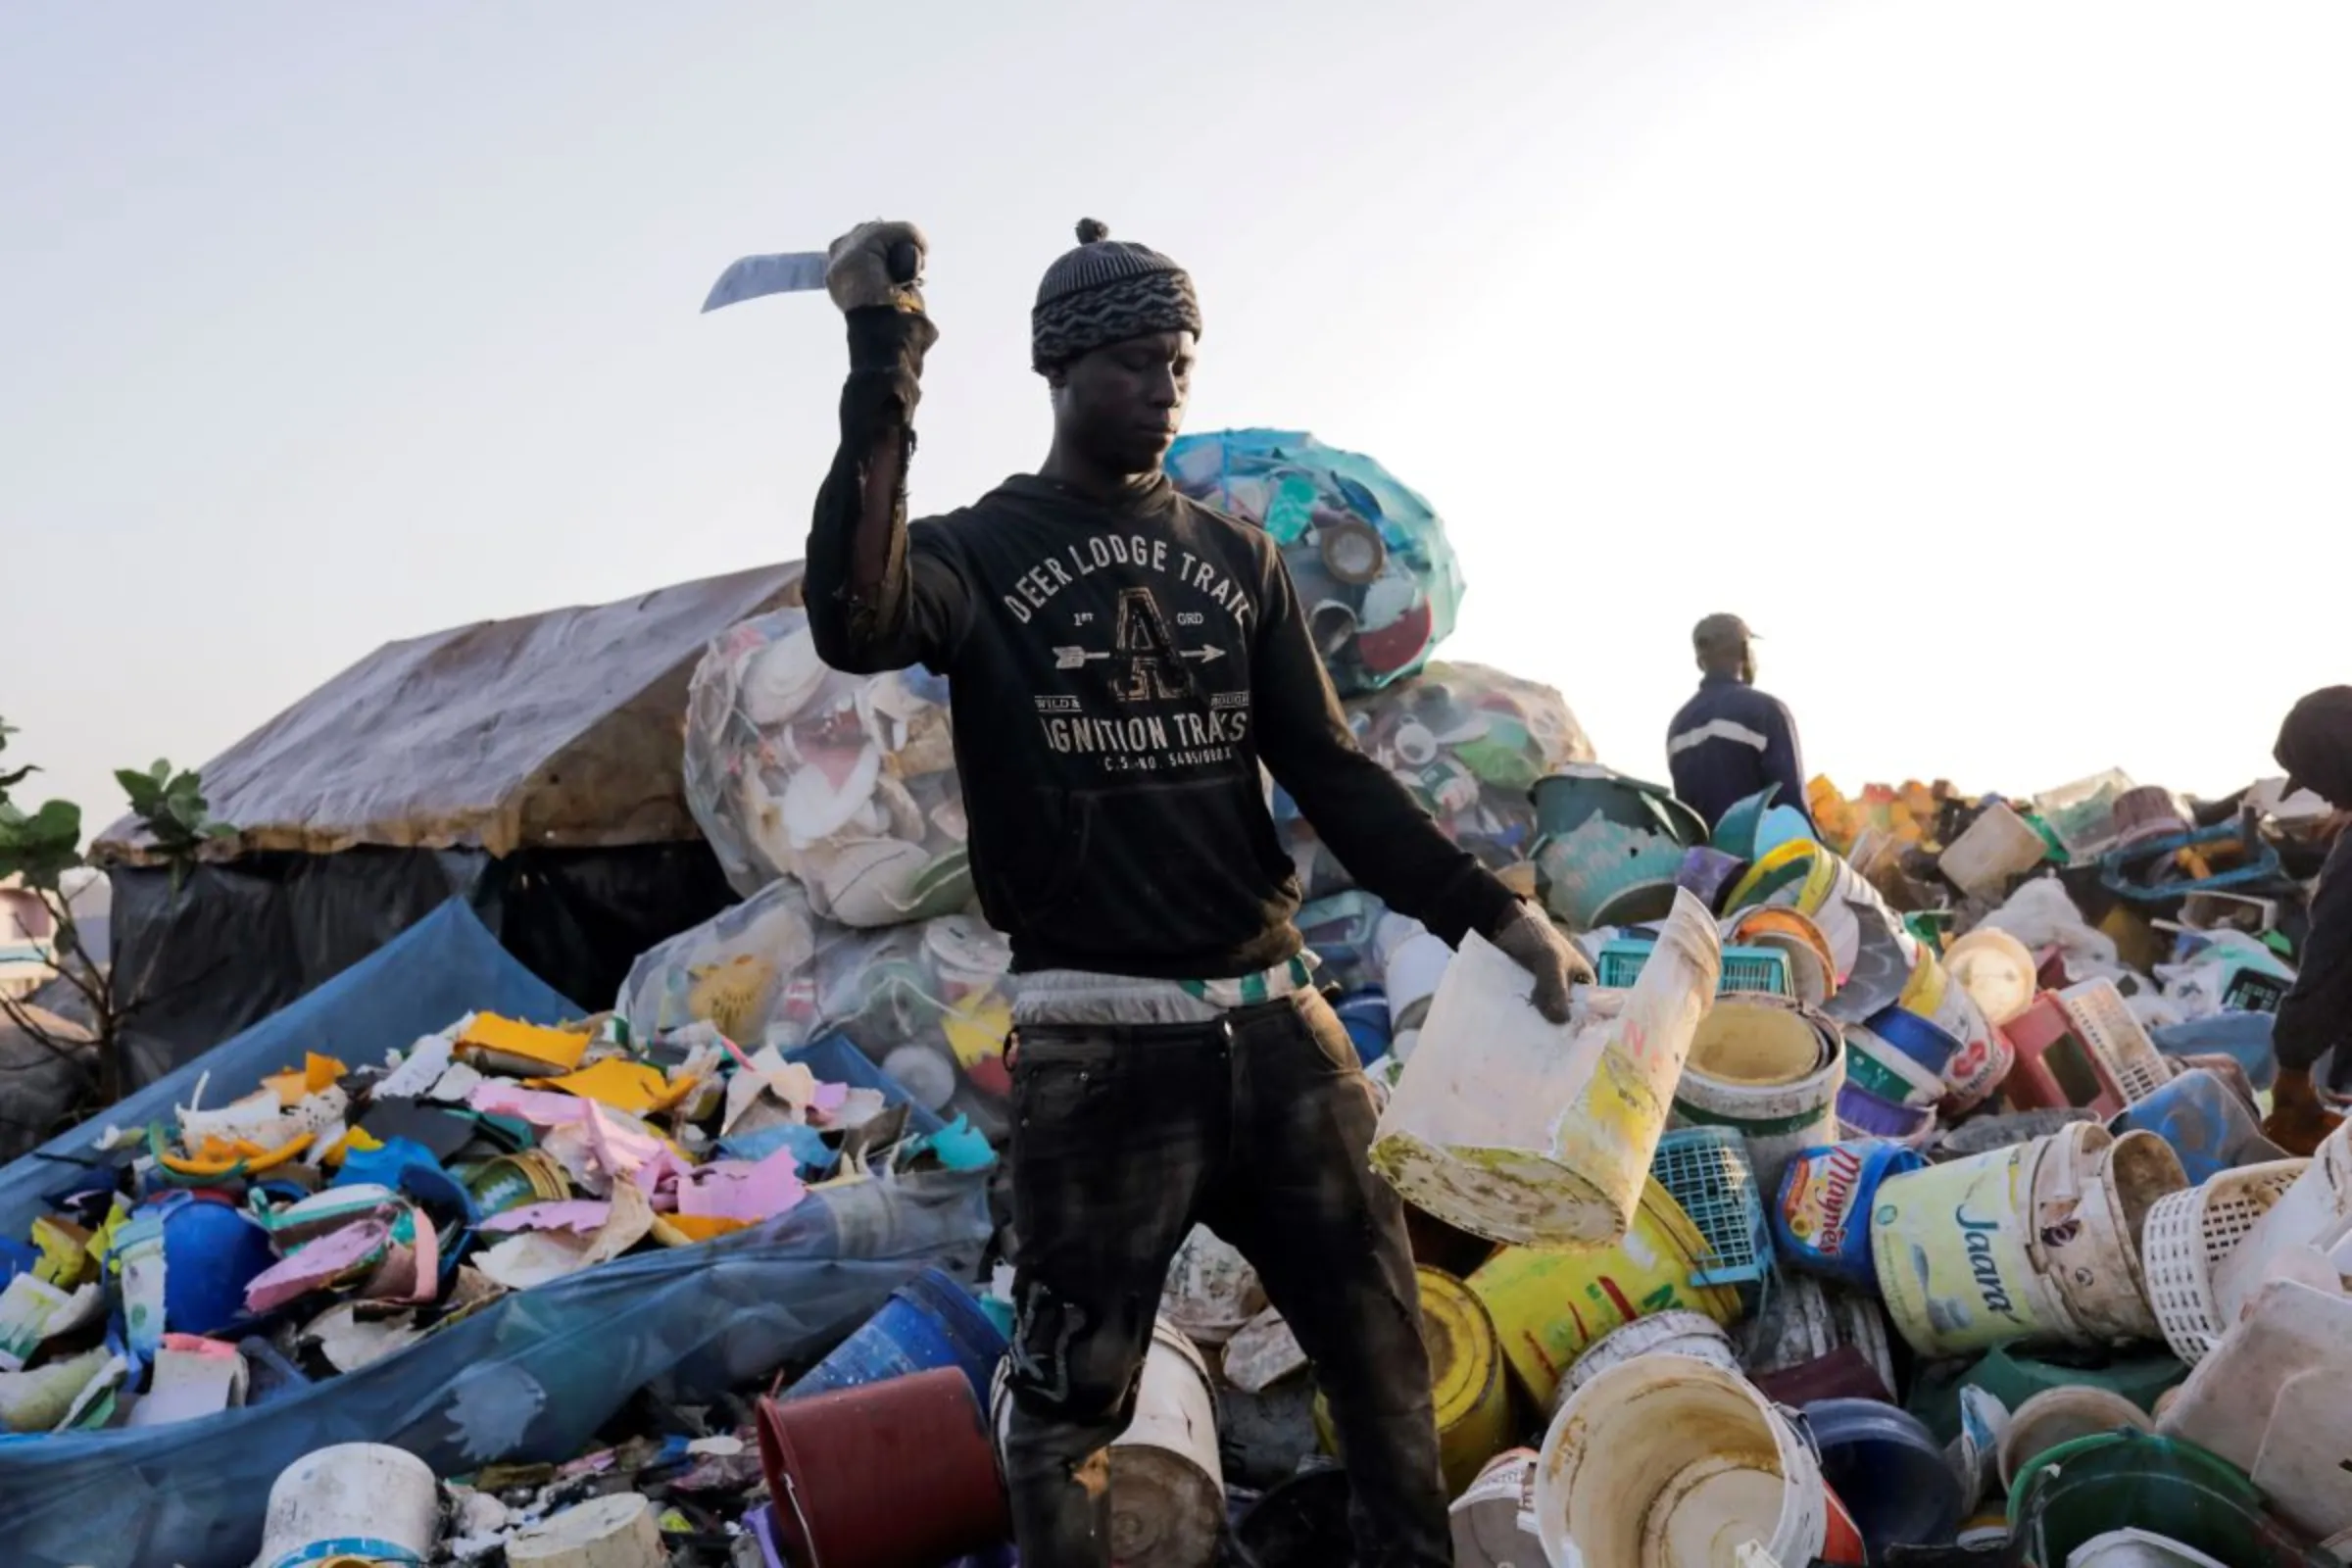 A man uses his machete to cut recyclable plastic buckets at the garbage dumping site in Senegal, April 29, 2022. REUTERS/Ngouda Dione